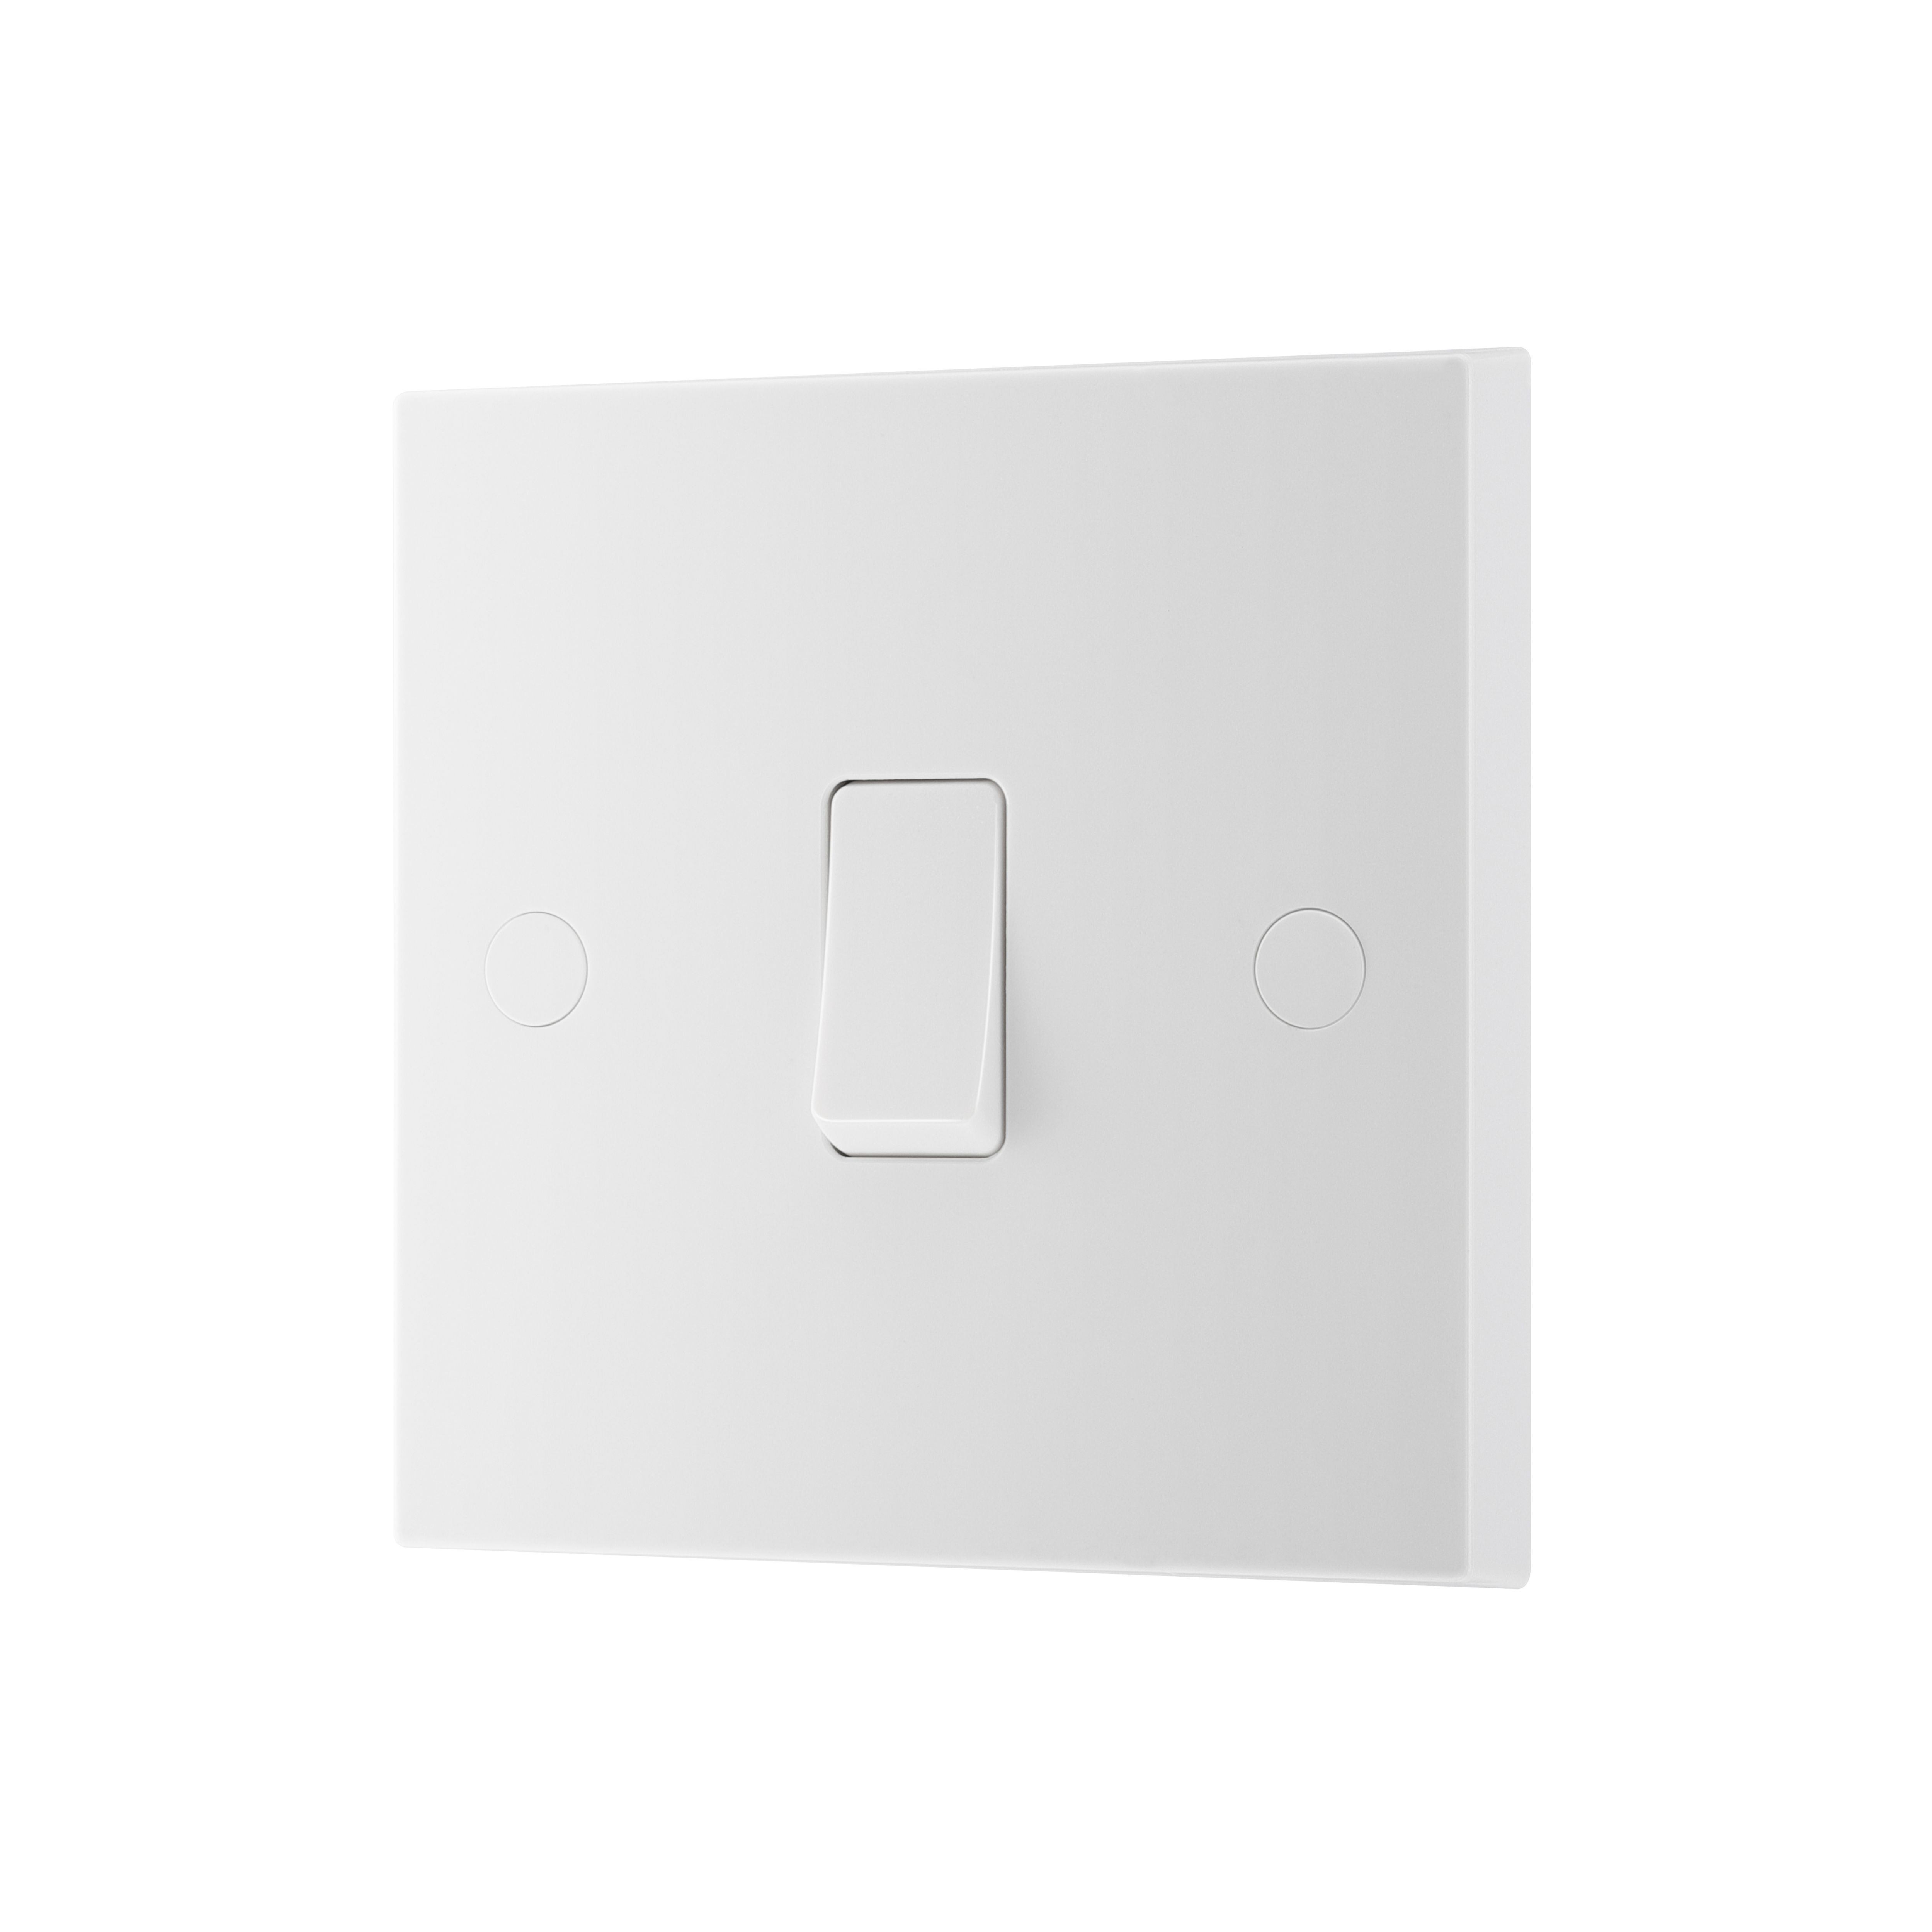 BG White 20A 1 way 1 gang Light Switch, Pack of 5